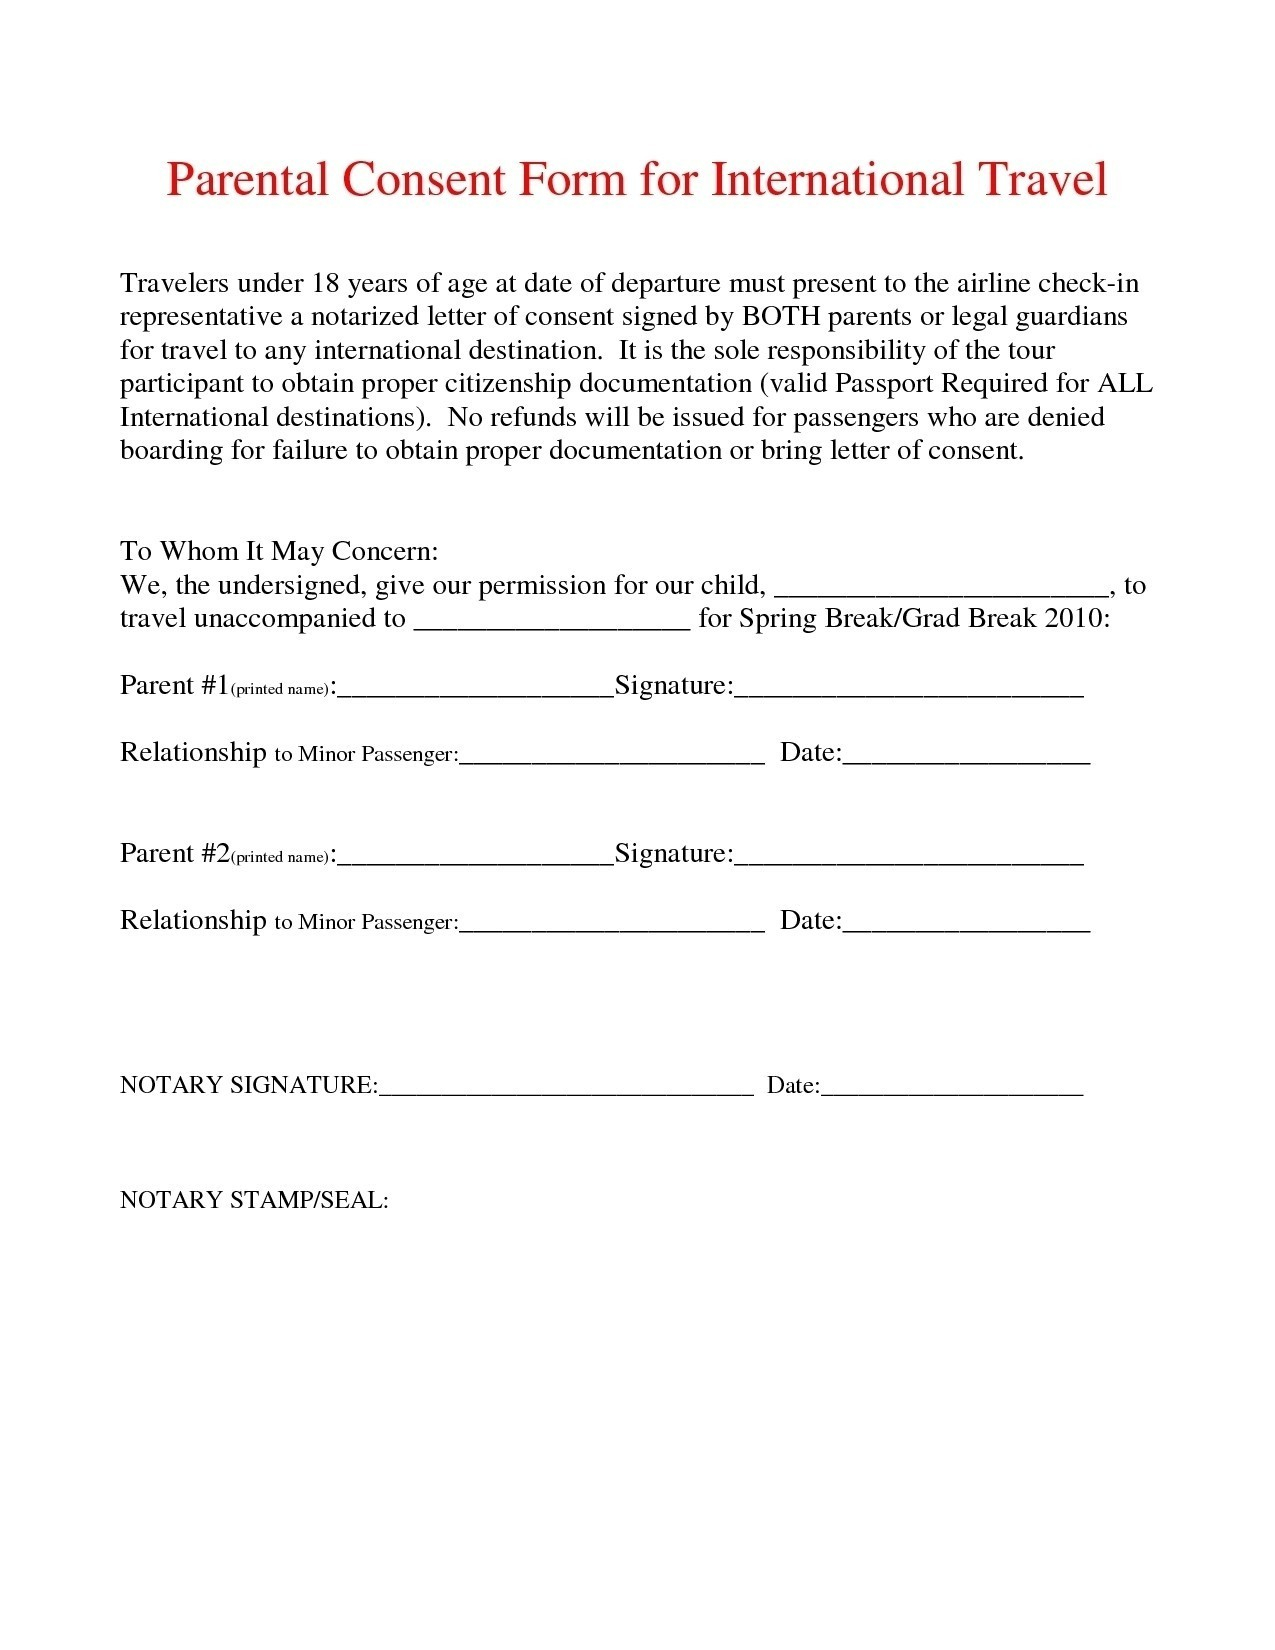 notarized travel consent form for minor